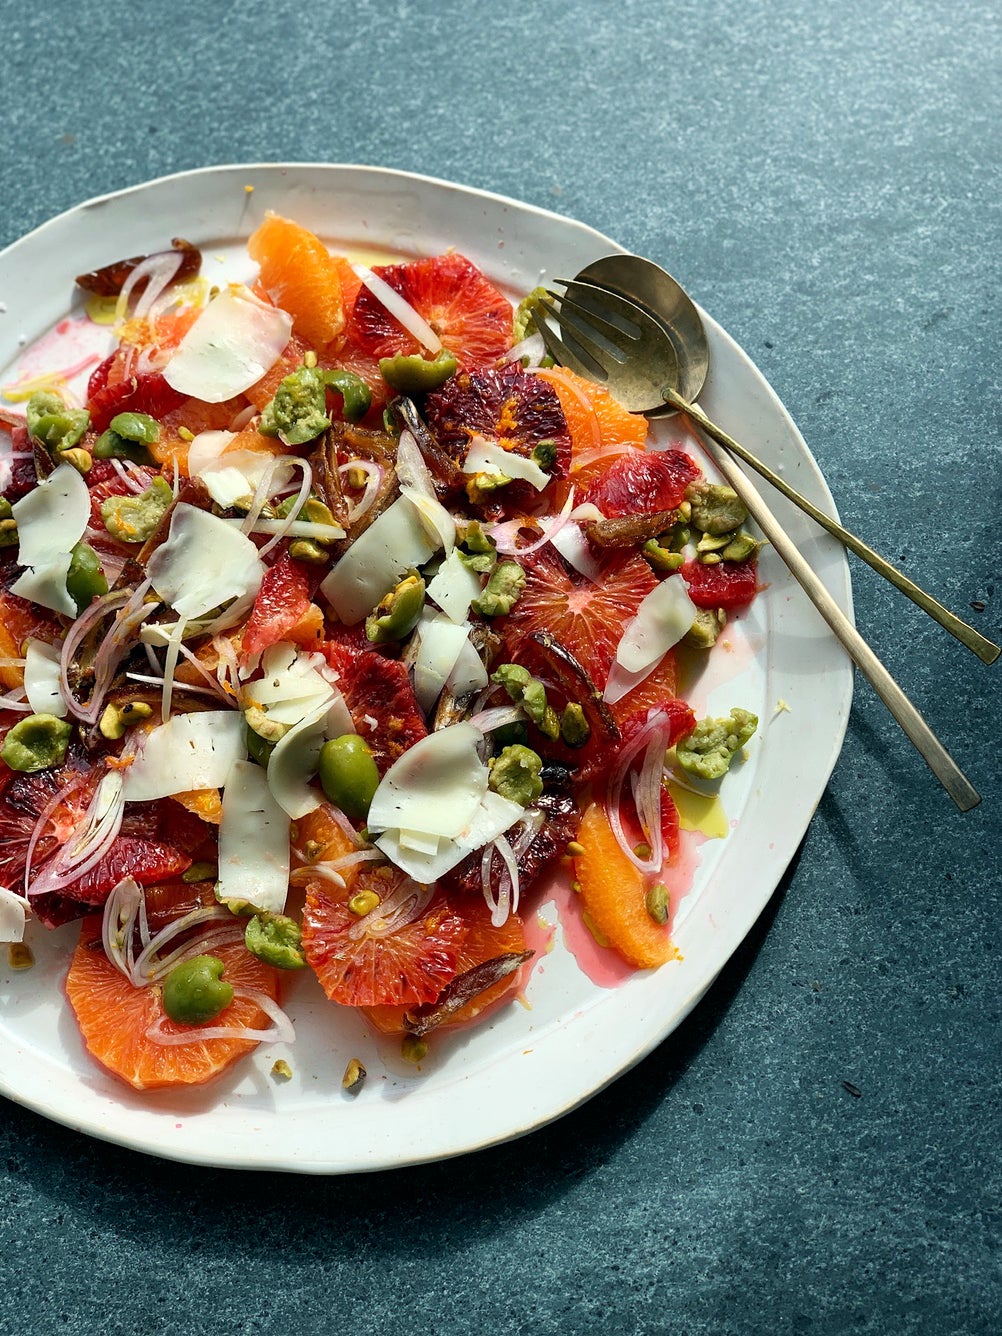 Citrus salad with olives